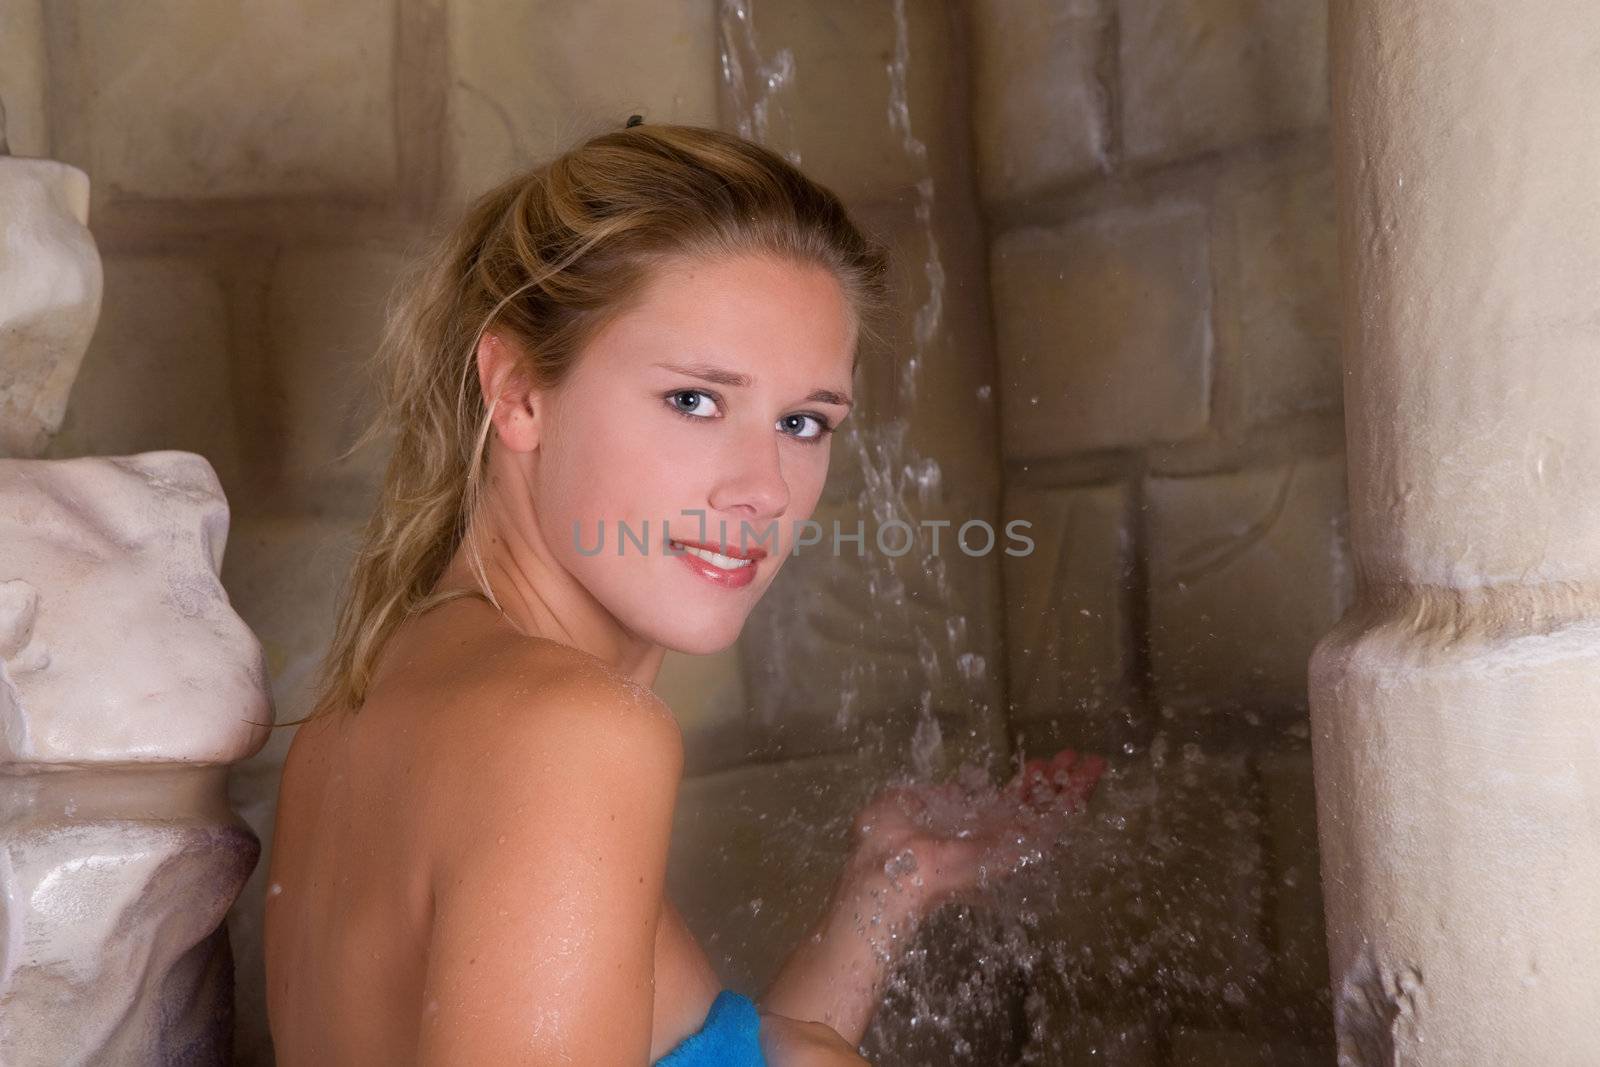 Pretty blond woman about to take a shower after having scrubbed